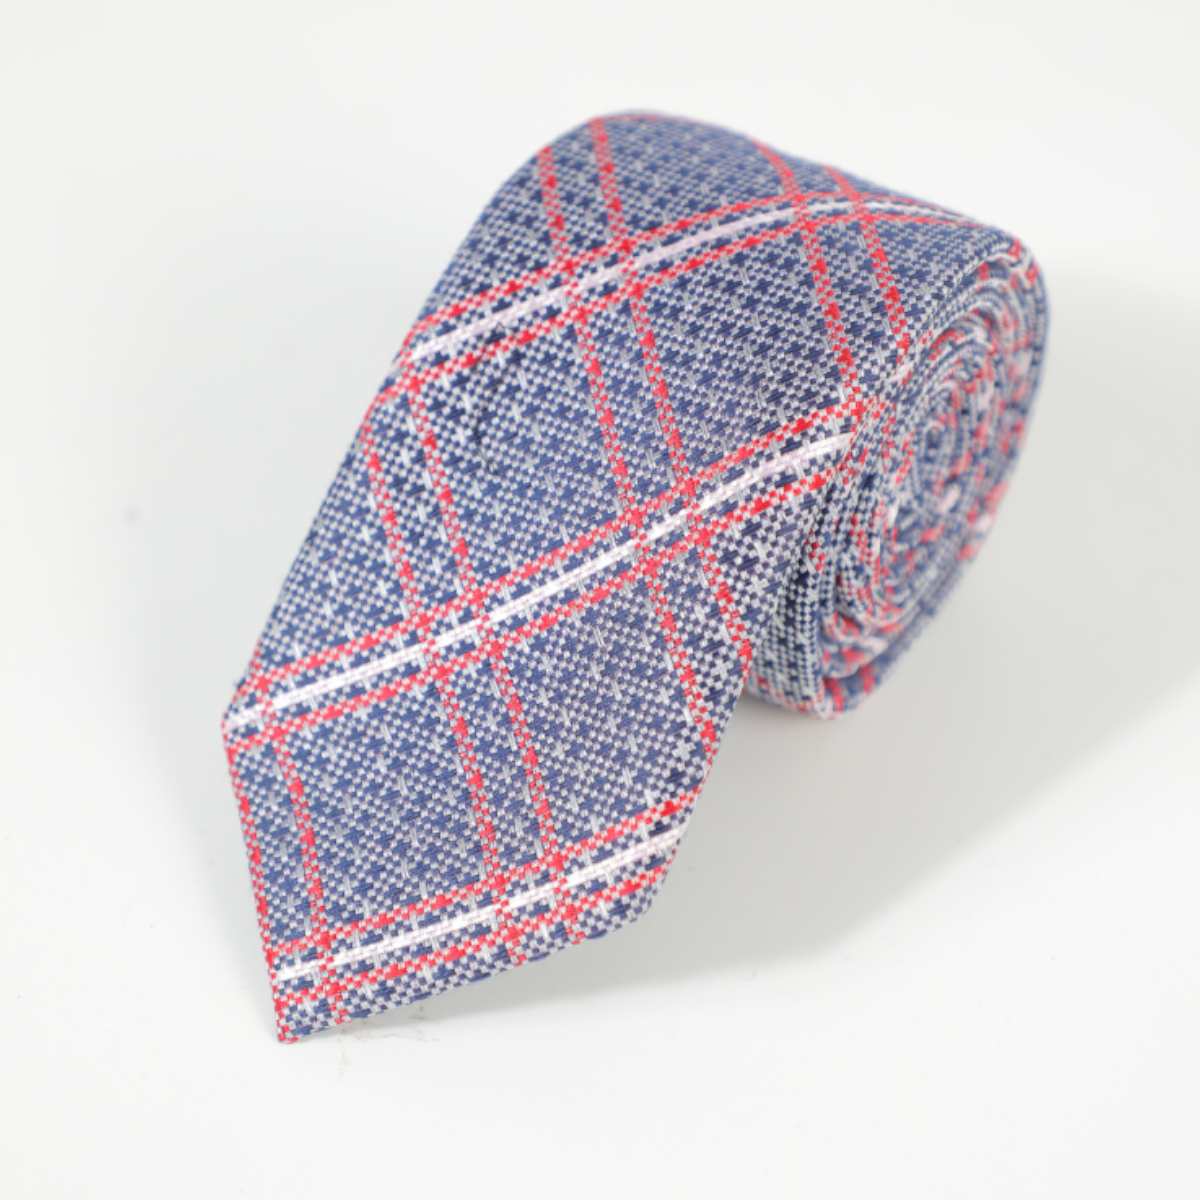 D's Damat Blue Tie With Red And White Pattern